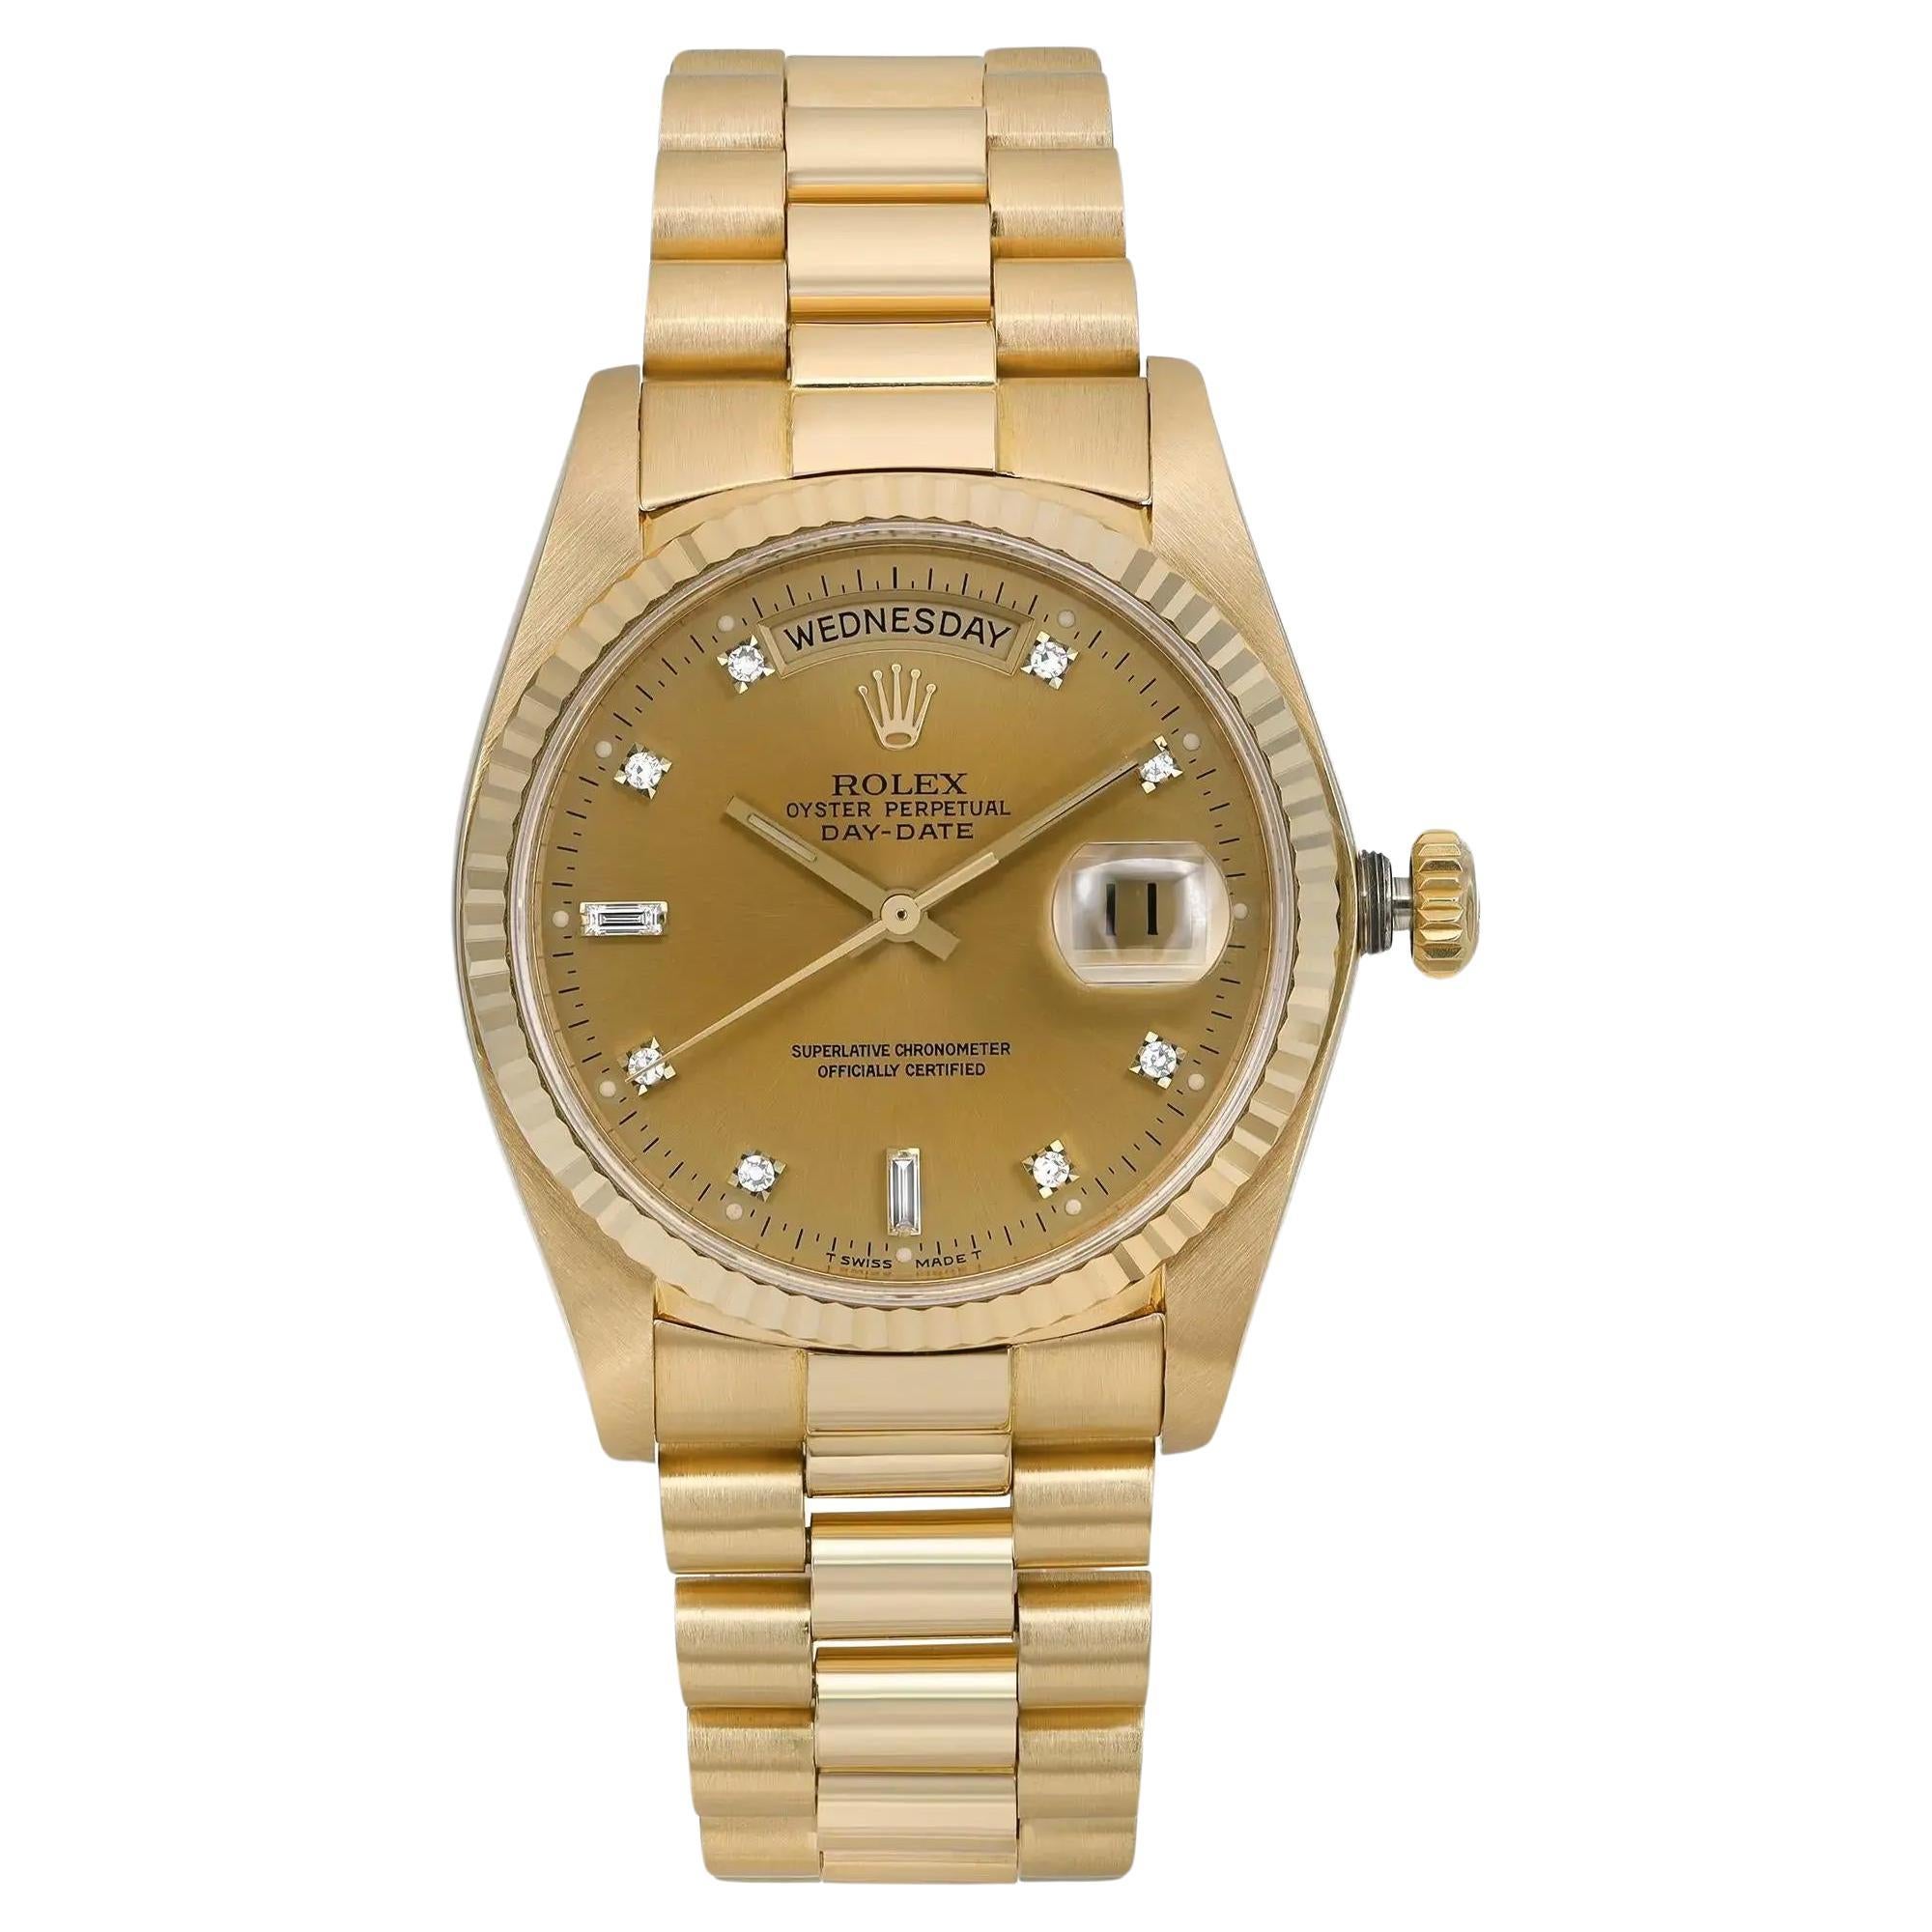 Rolex Day-Date 36mm 18K Gold Champagne Diamond Dial Automatic Mens Watch 18038A